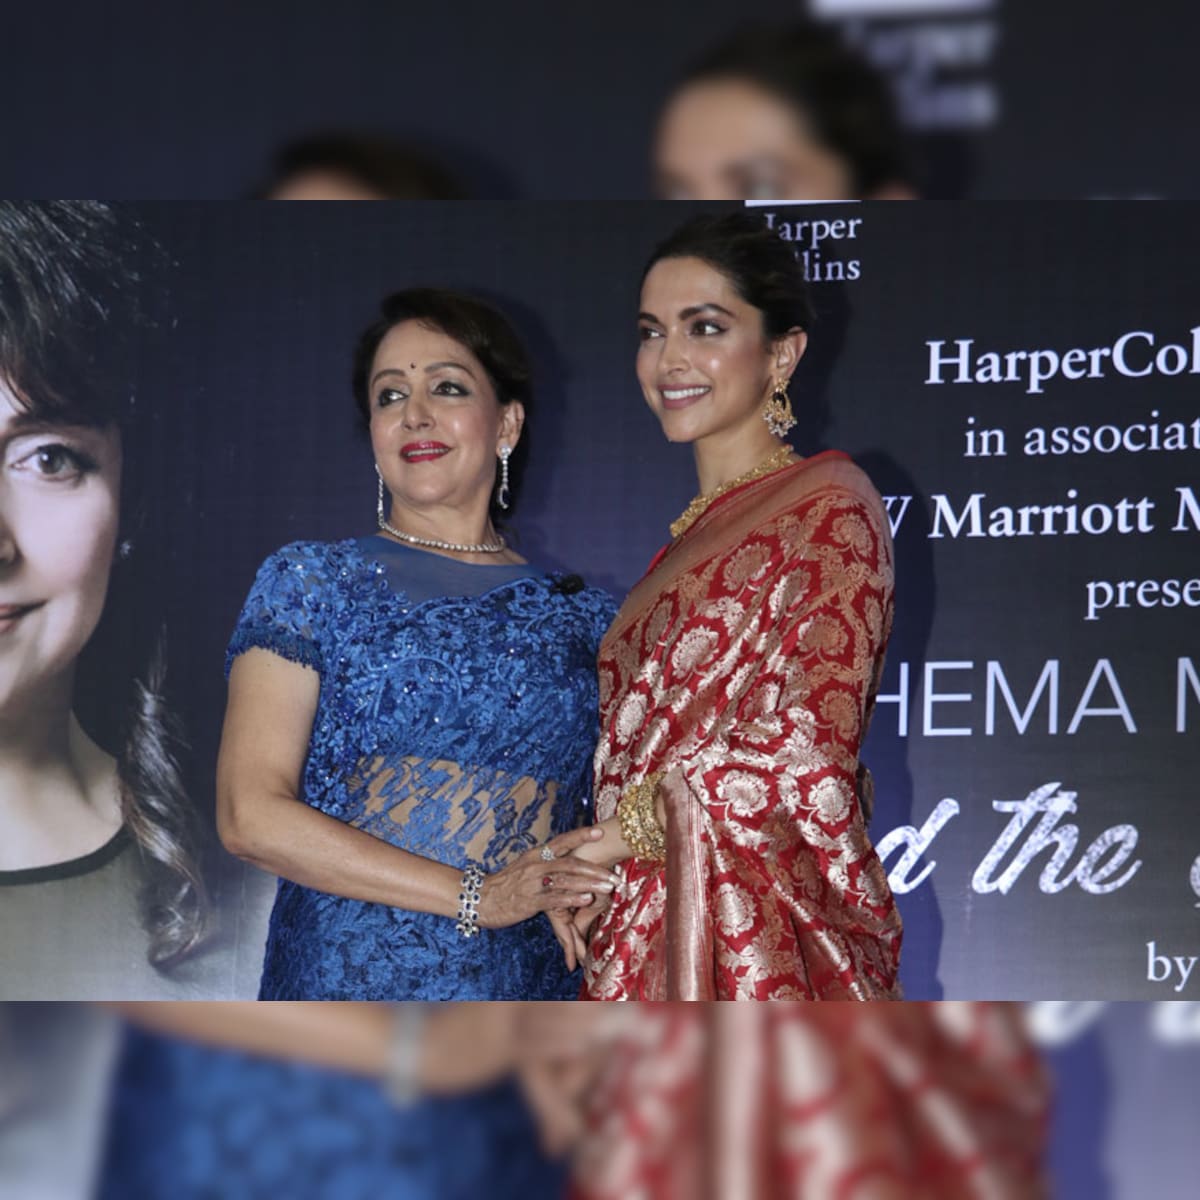 Hema Malini Says Deepika Padukone is Doing that She'd Have Loved to Do 15-20 Ago